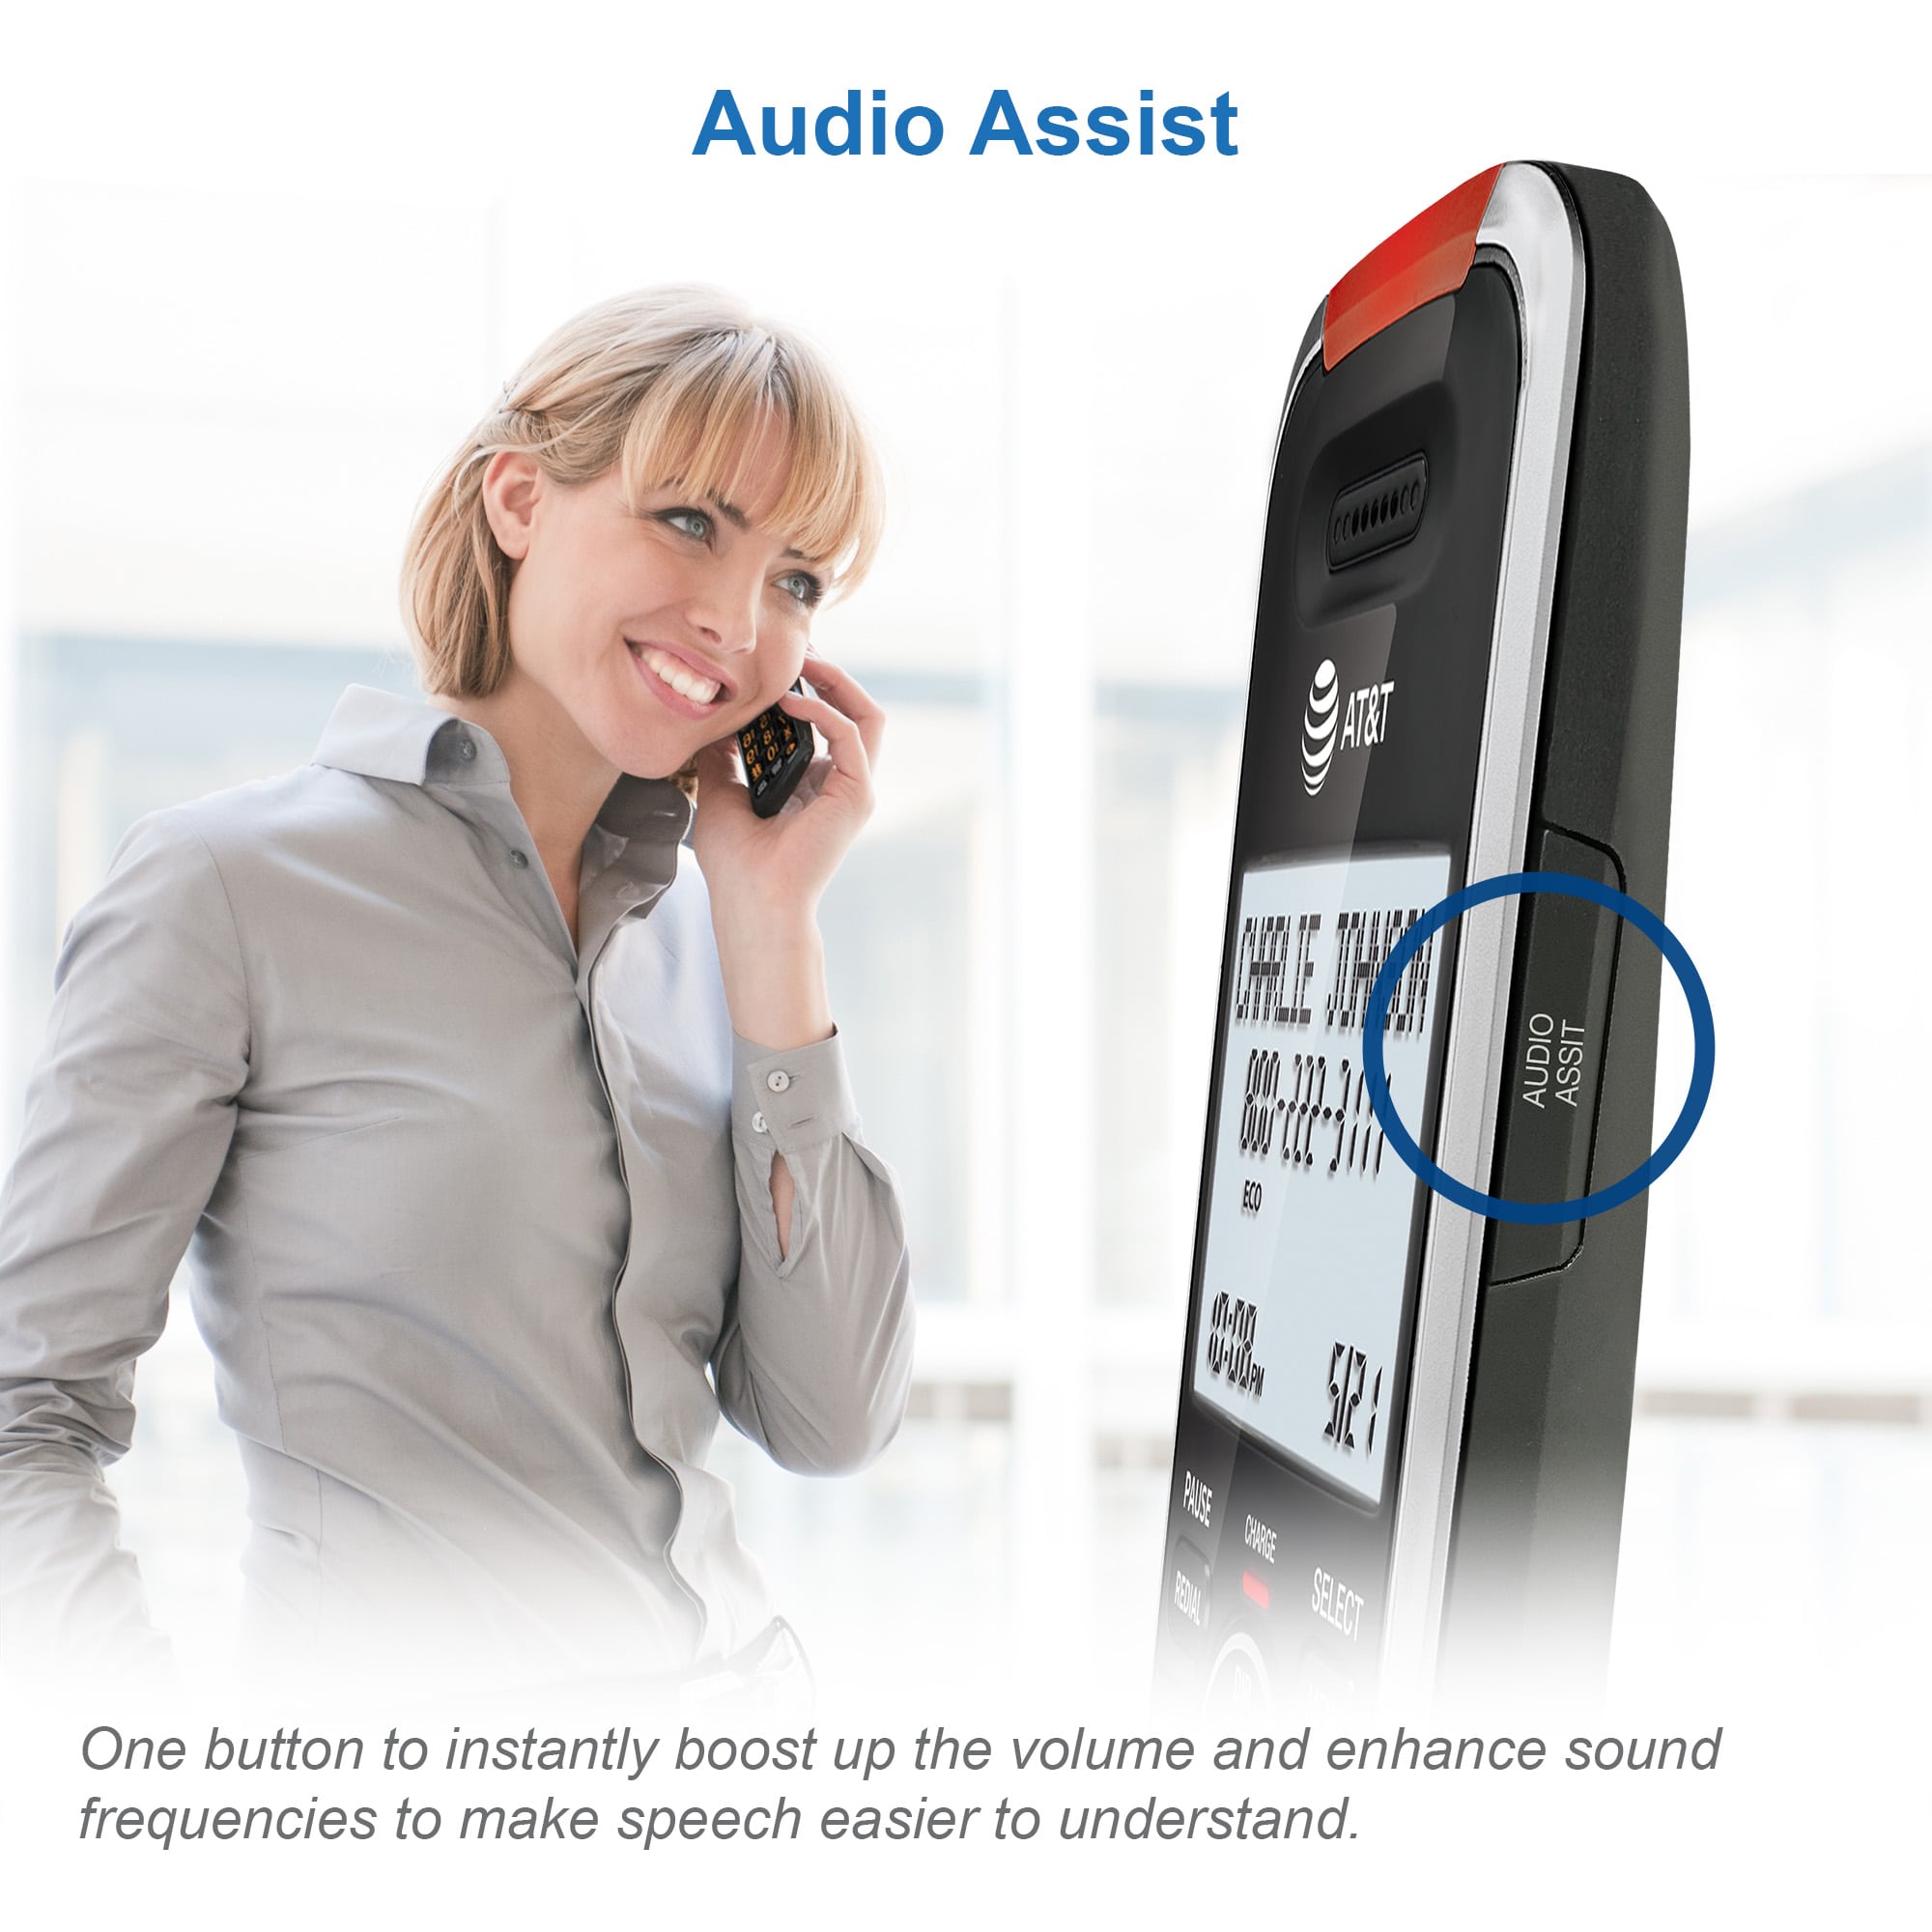 2-Handset Cordless Phone with Unsurpassed Range, Smart Call Blocker and Answering System - view 7